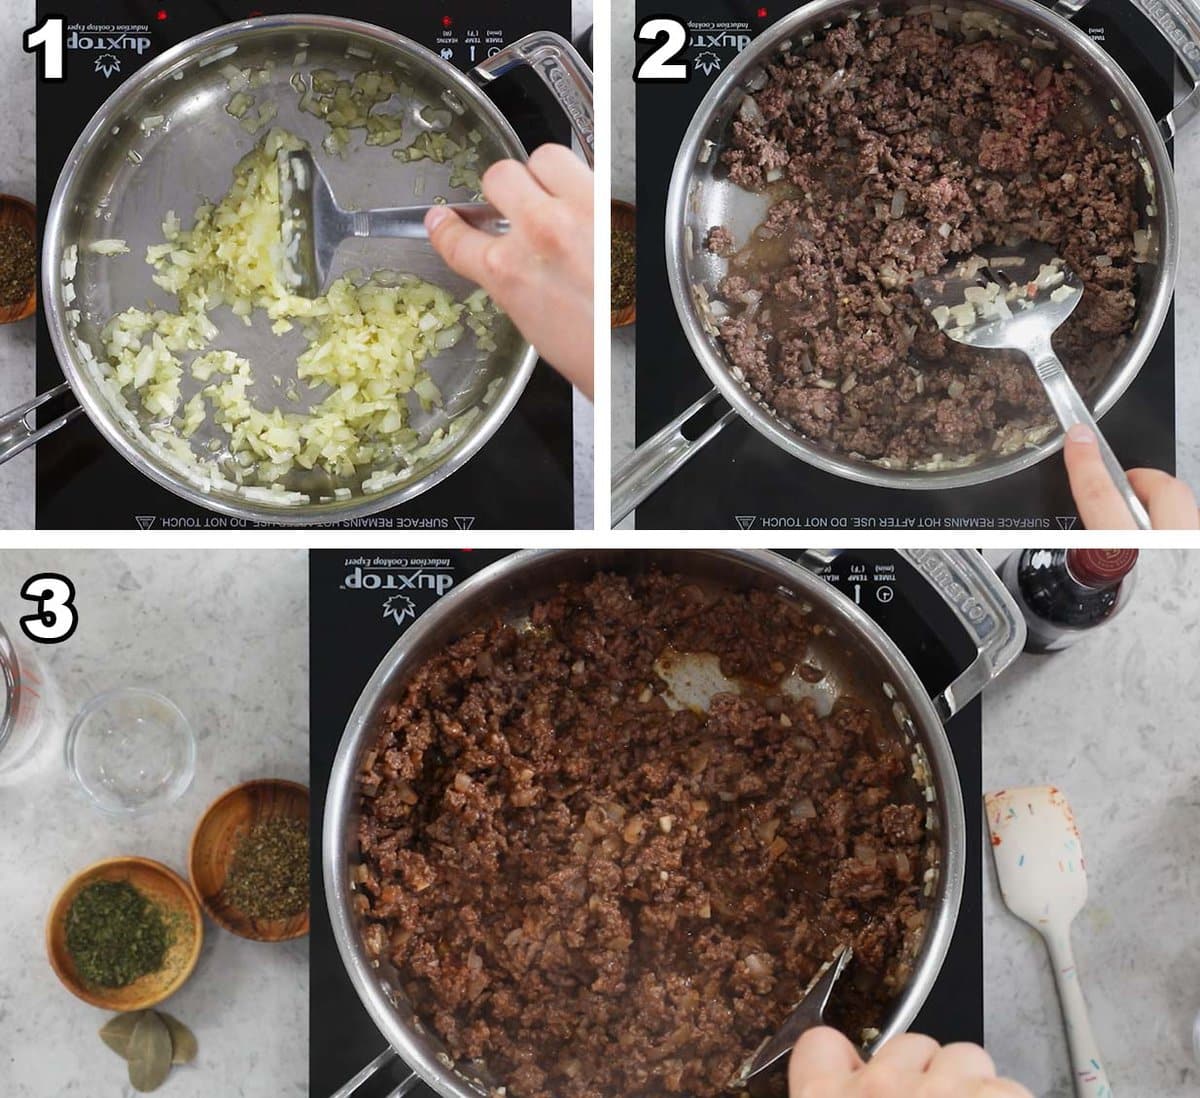 Three photos showing onion and garlic cooking in a pot before ground beef is added and browned.